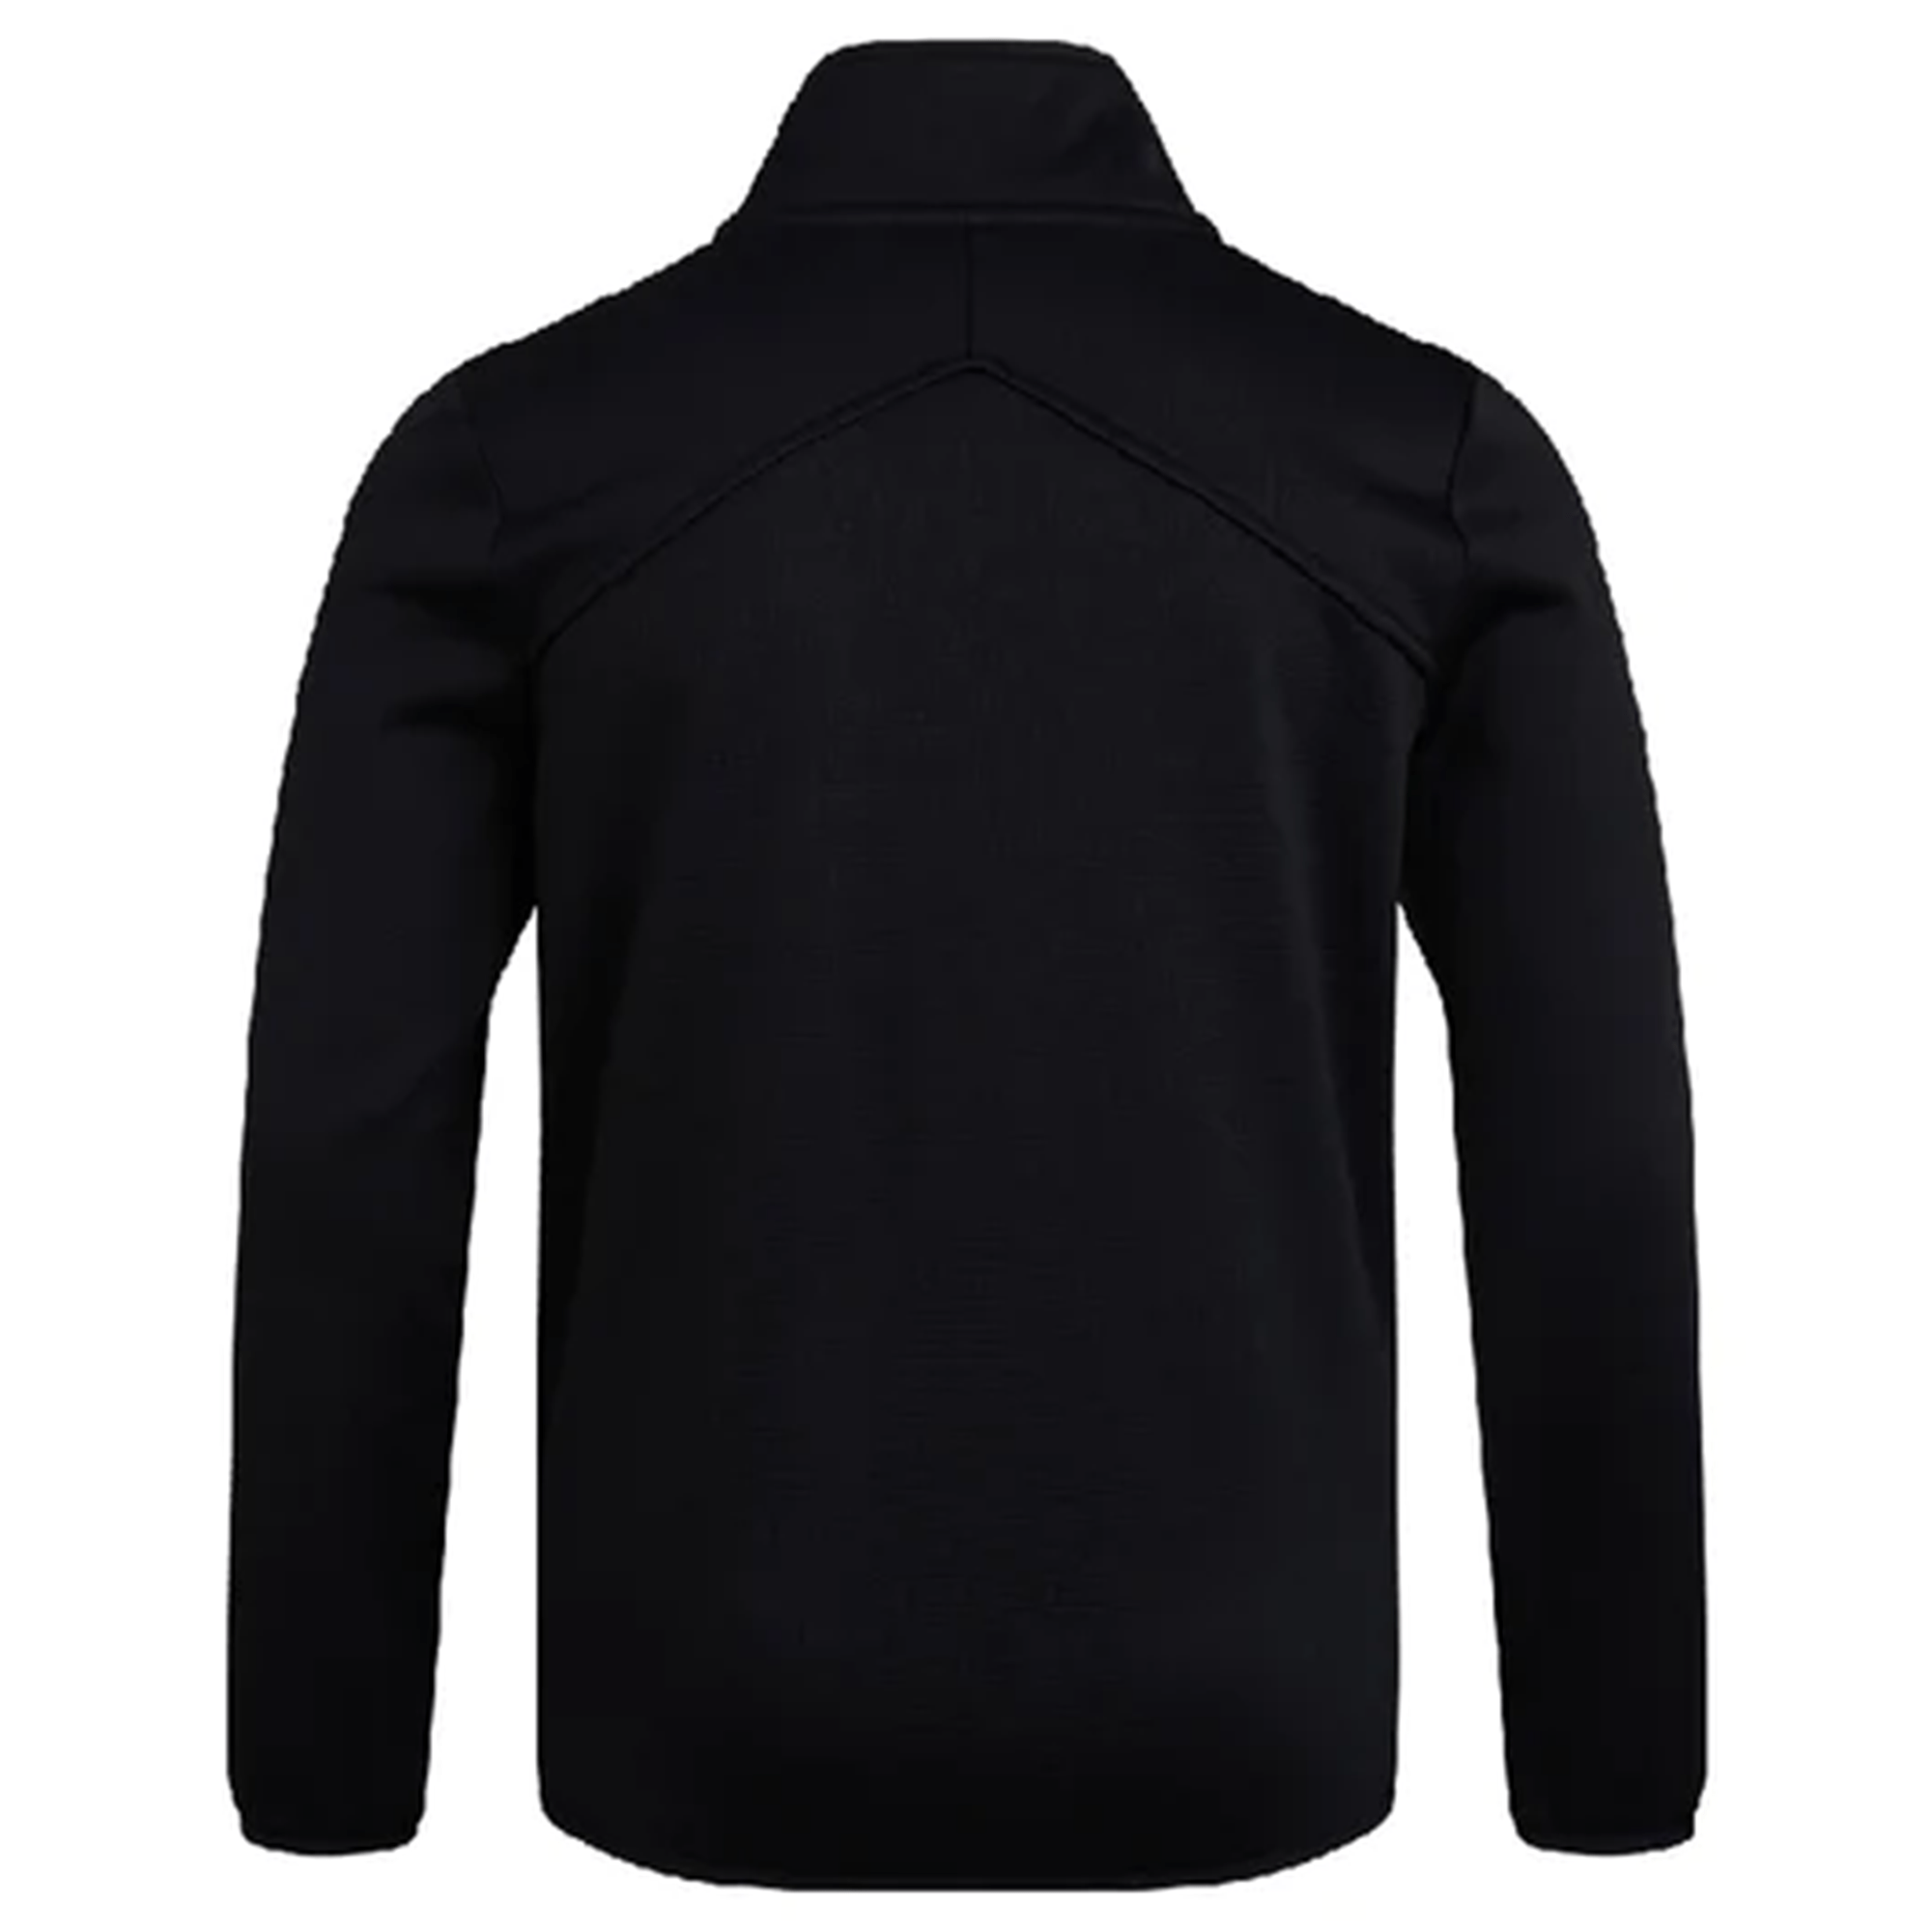 Men's Tops, Mid-layers & T-Shirts